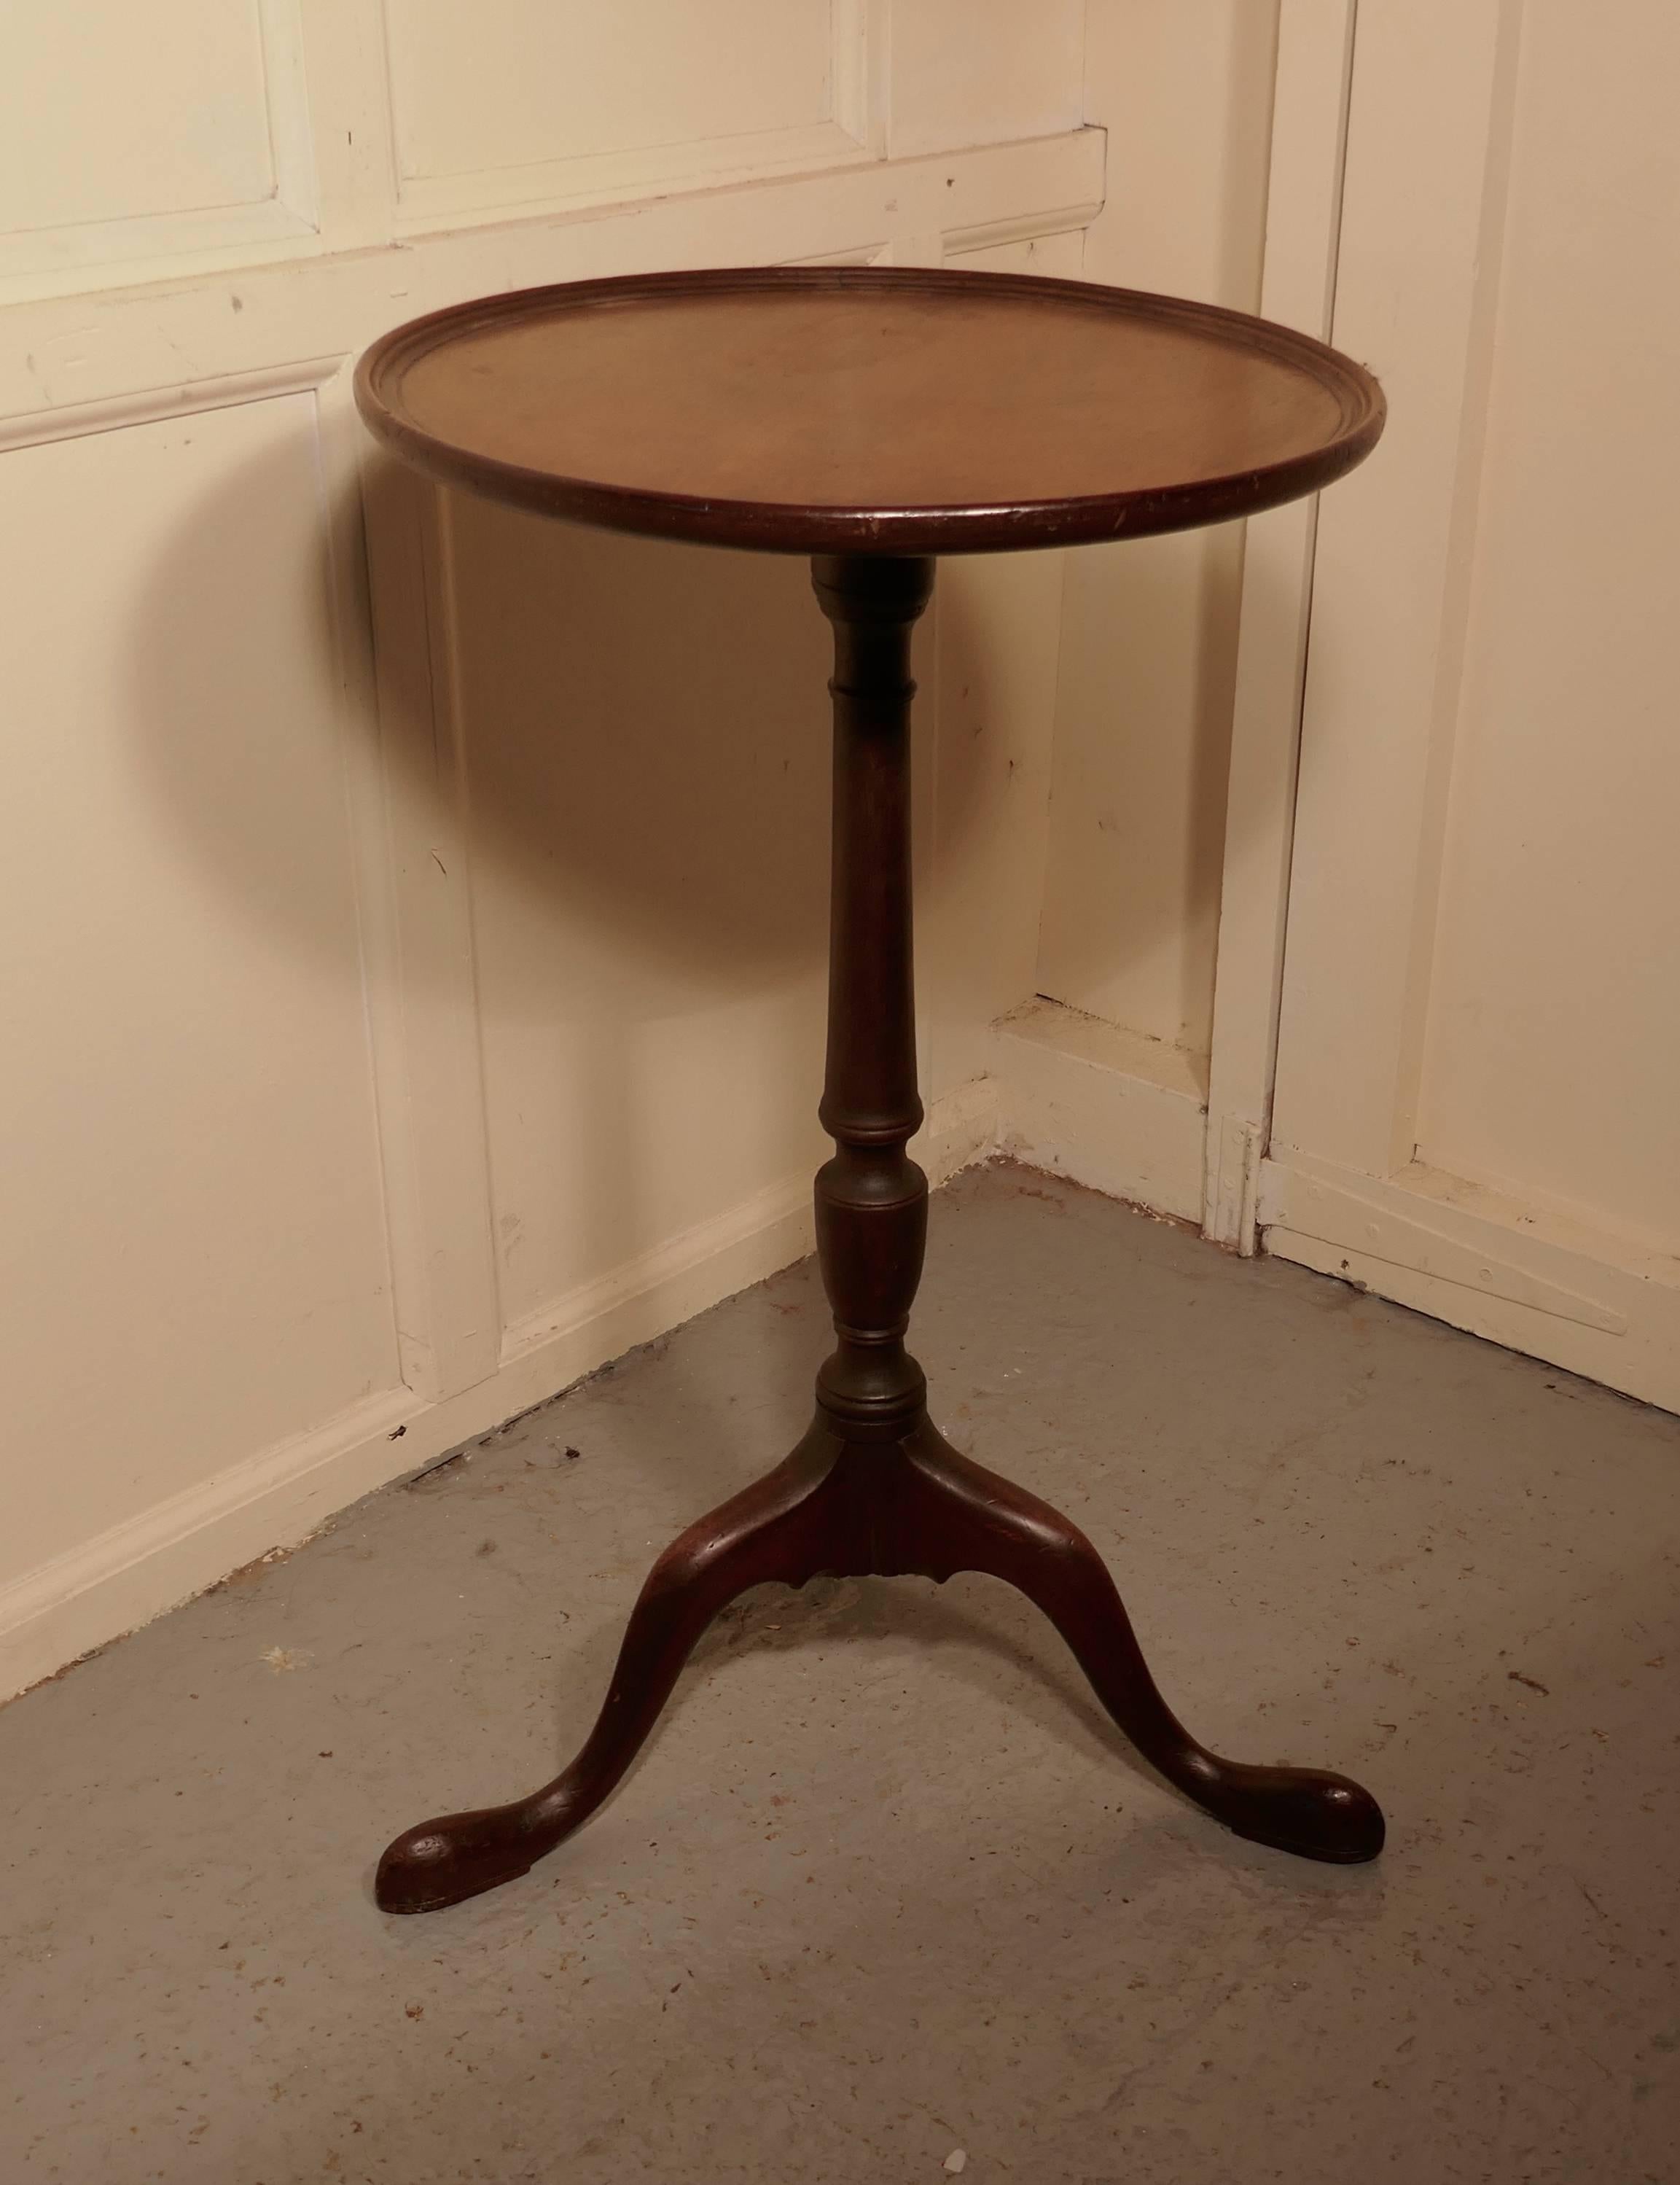 Small 19th century mahogany wine table

This lovely table it stands on a three footed base and has a attractive turned centre leg
The one piece round mahogany top has a dainty raised and moulded edge
The table is in good condition there are some